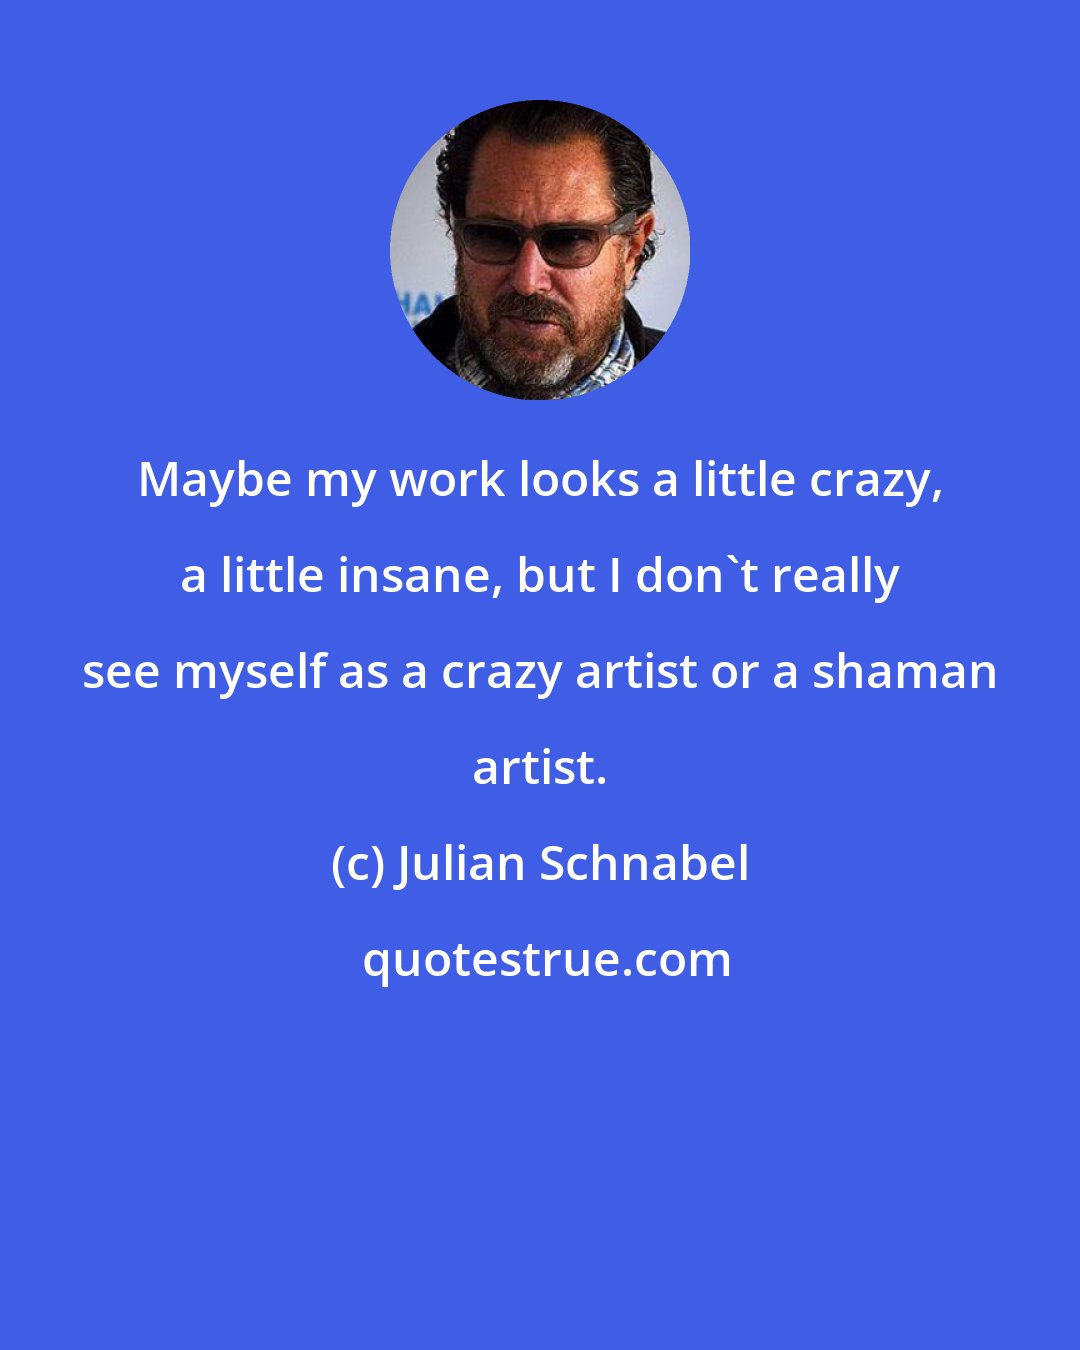 Julian Schnabel: Maybe my work looks a little crazy, a little insane, but I don't really see myself as a crazy artist or a shaman artist.